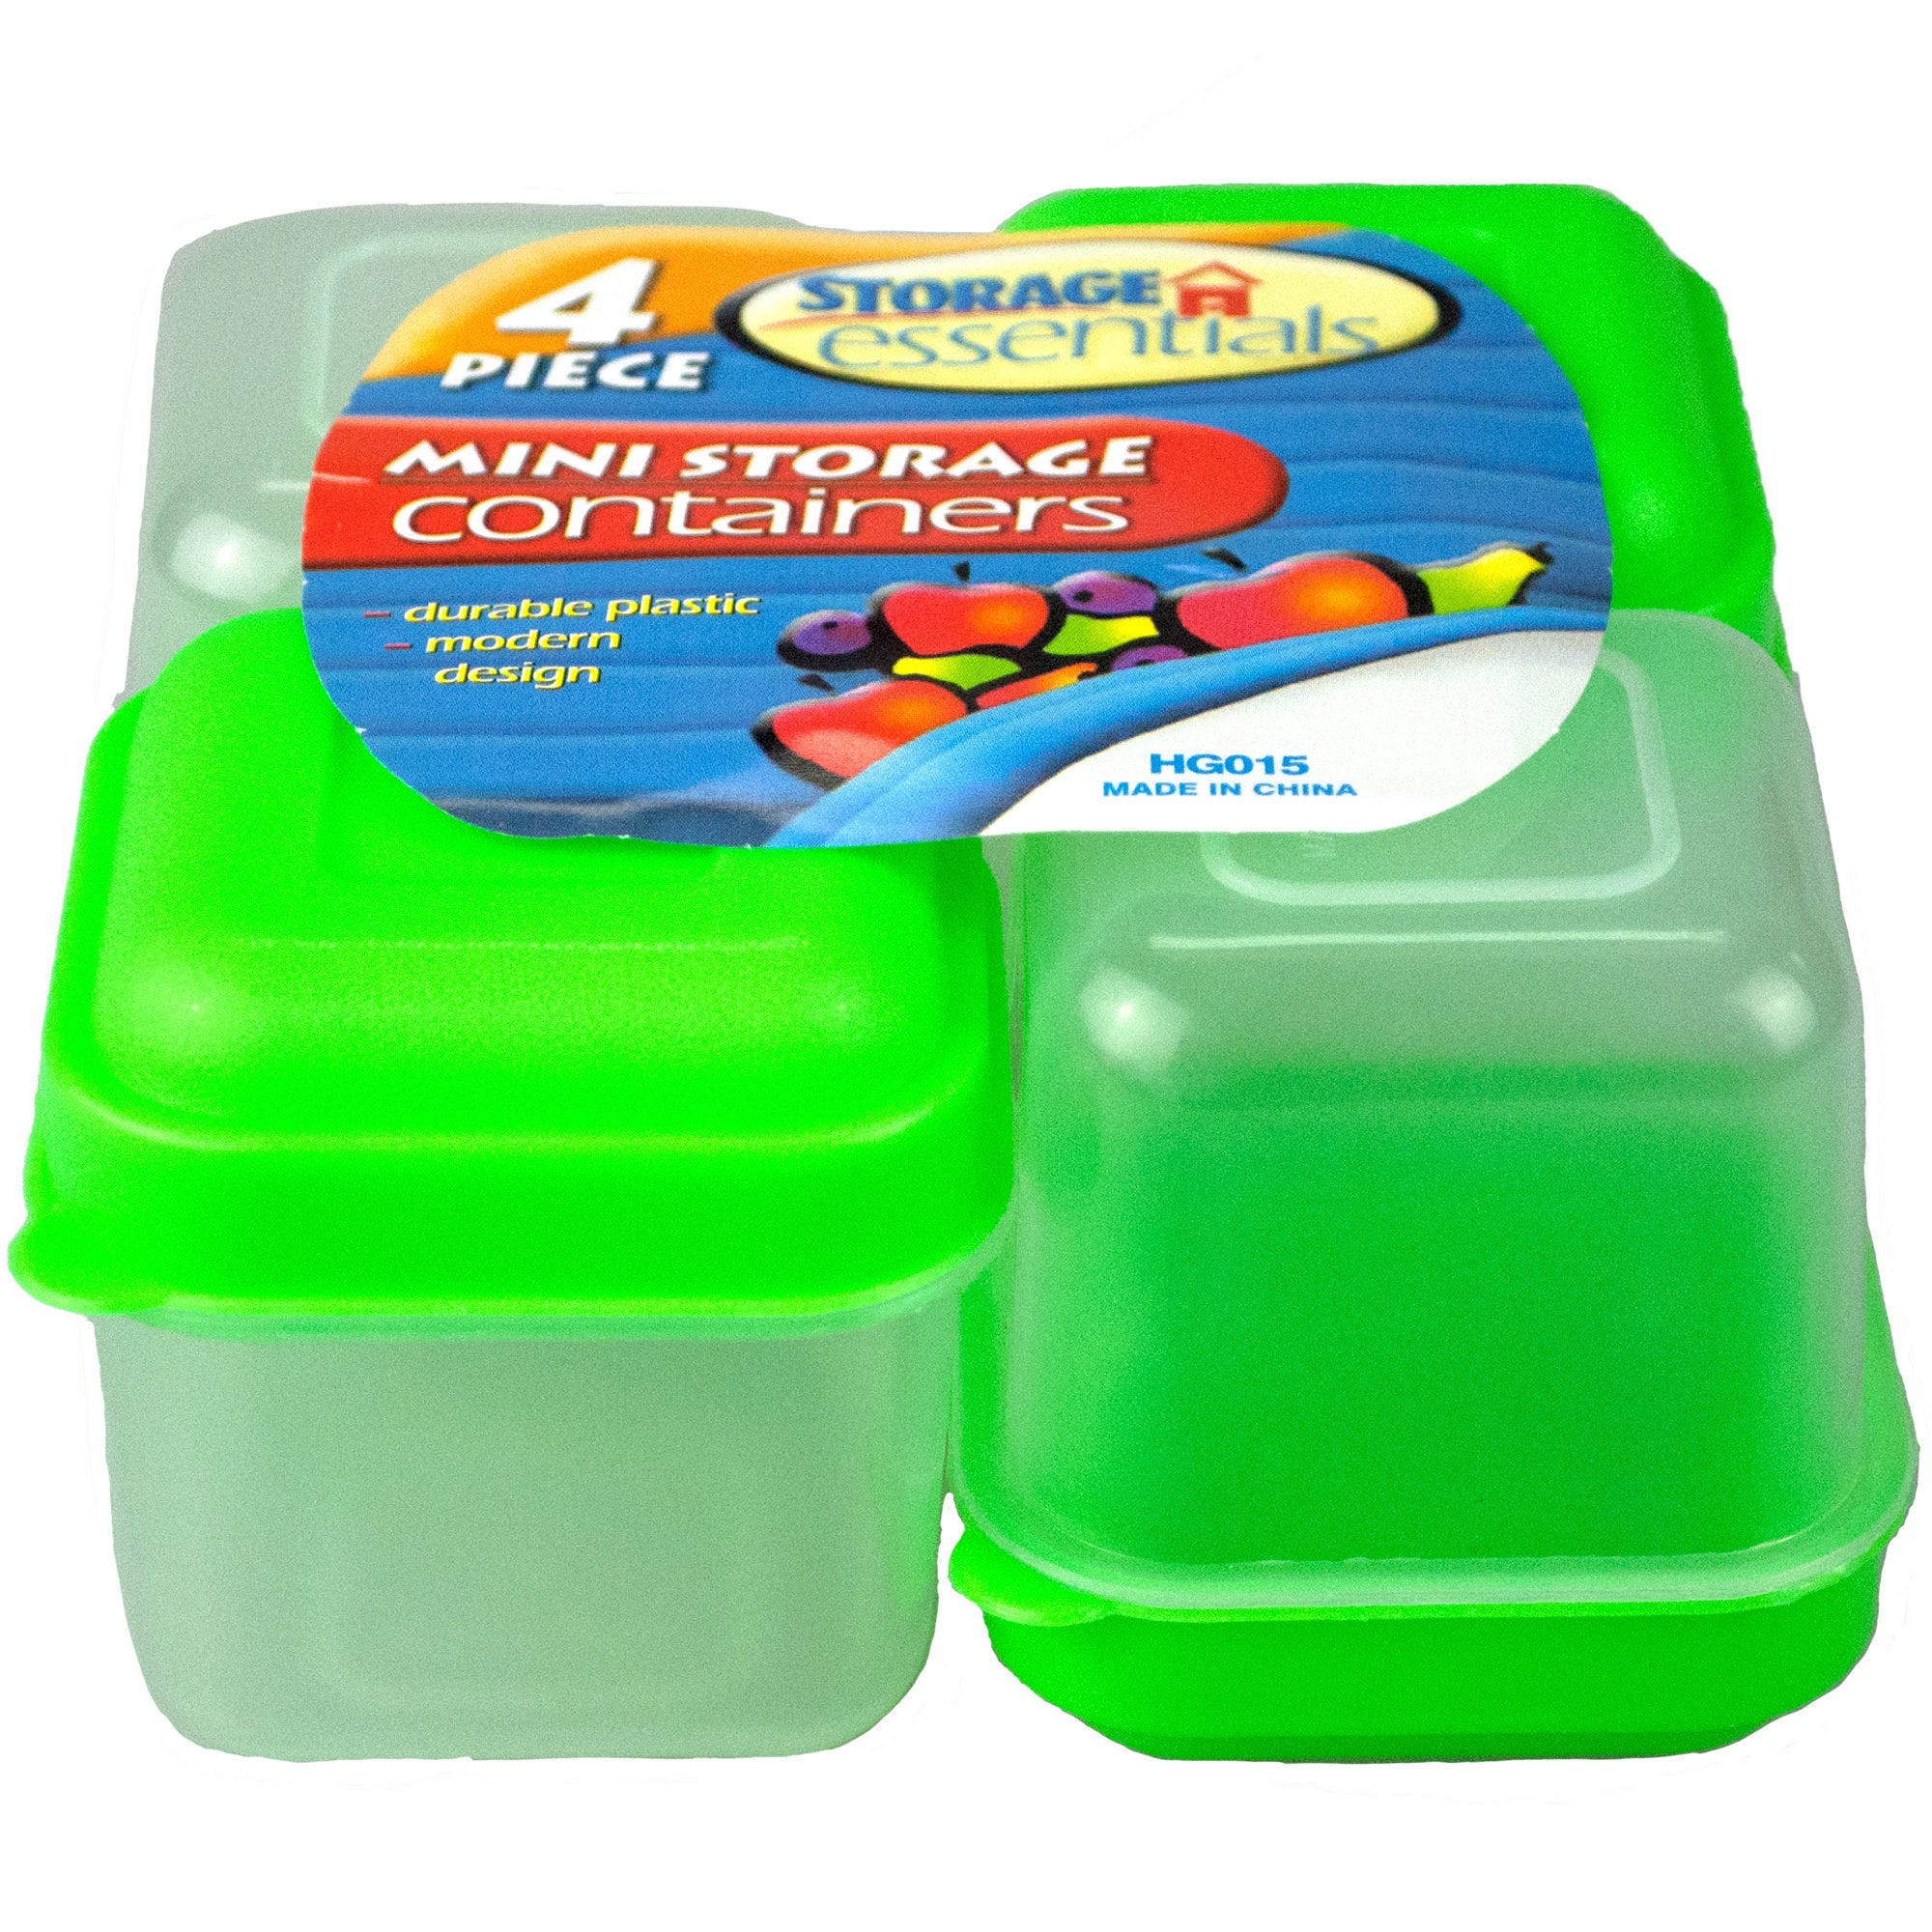 Miniature Storage Containers - Qty 24